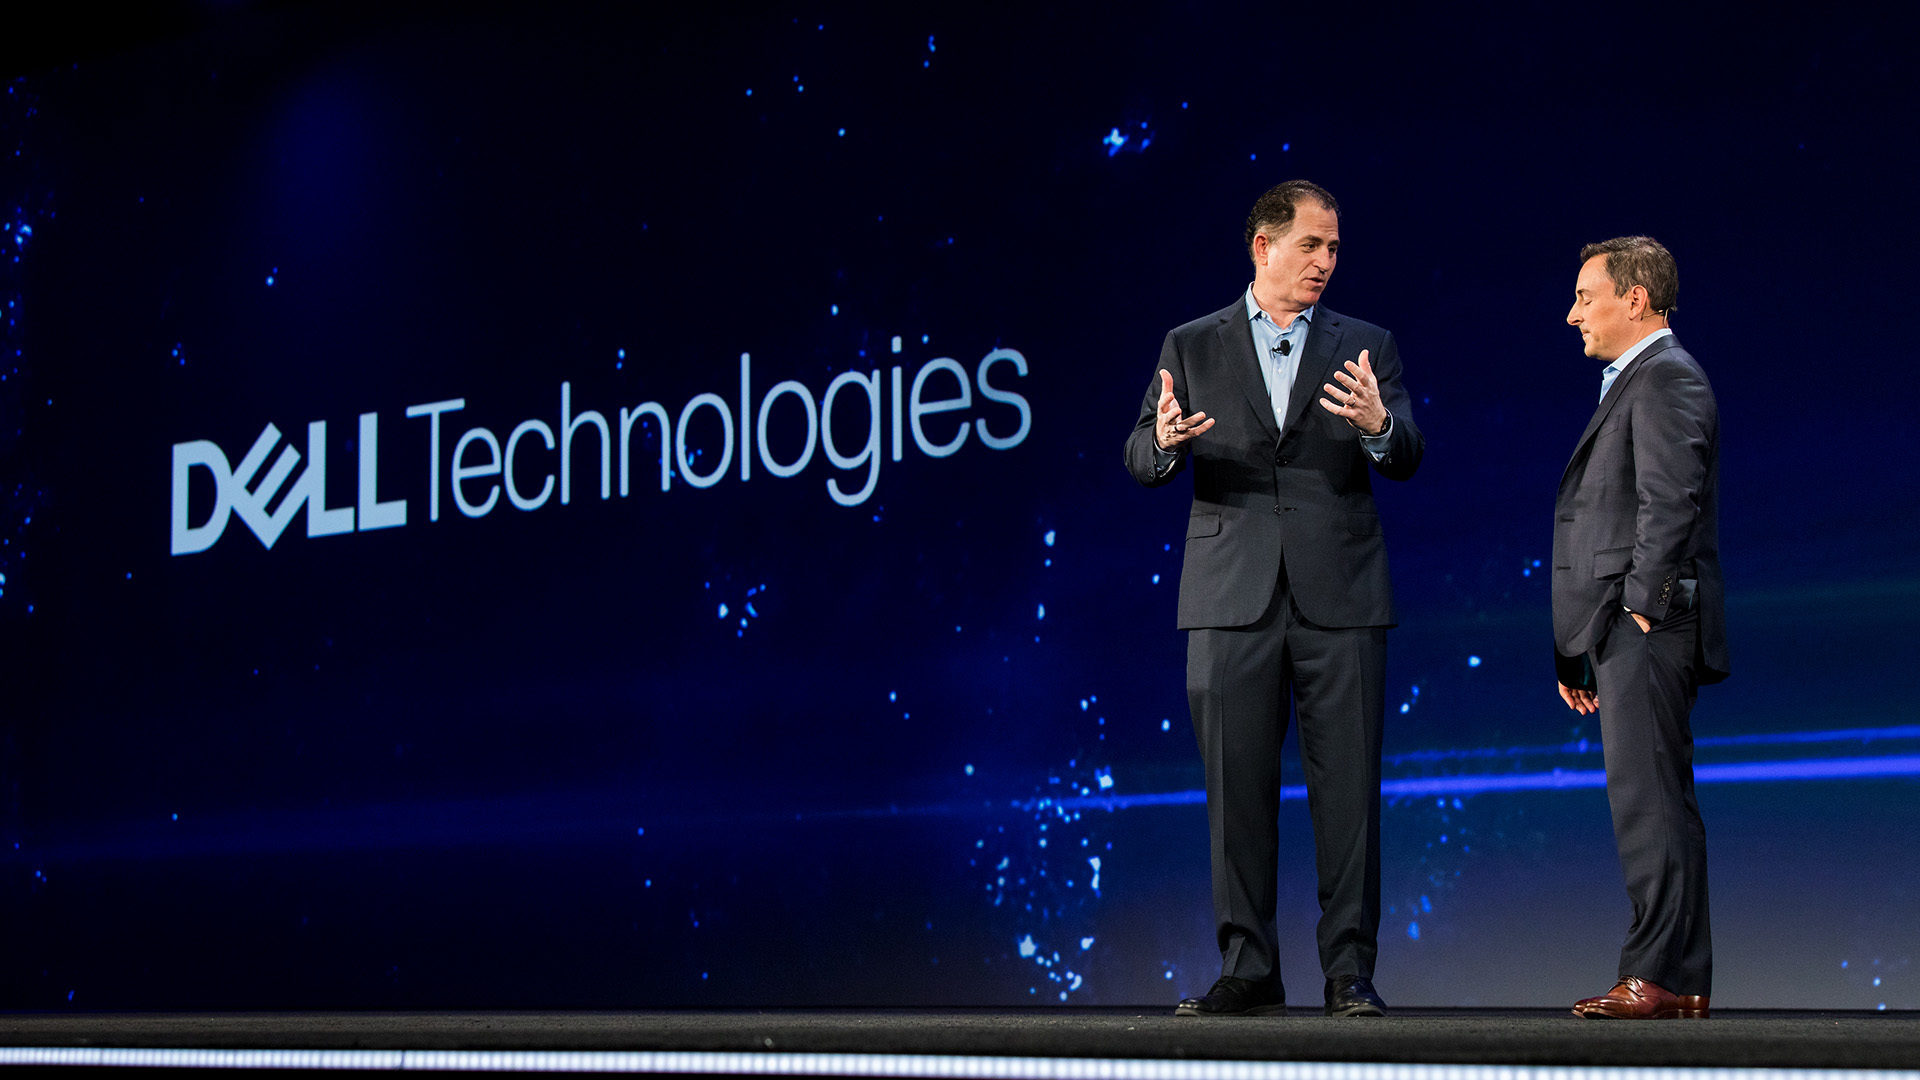 Two men speaking on stage with the Dell Technologies logo on the screen behind them.